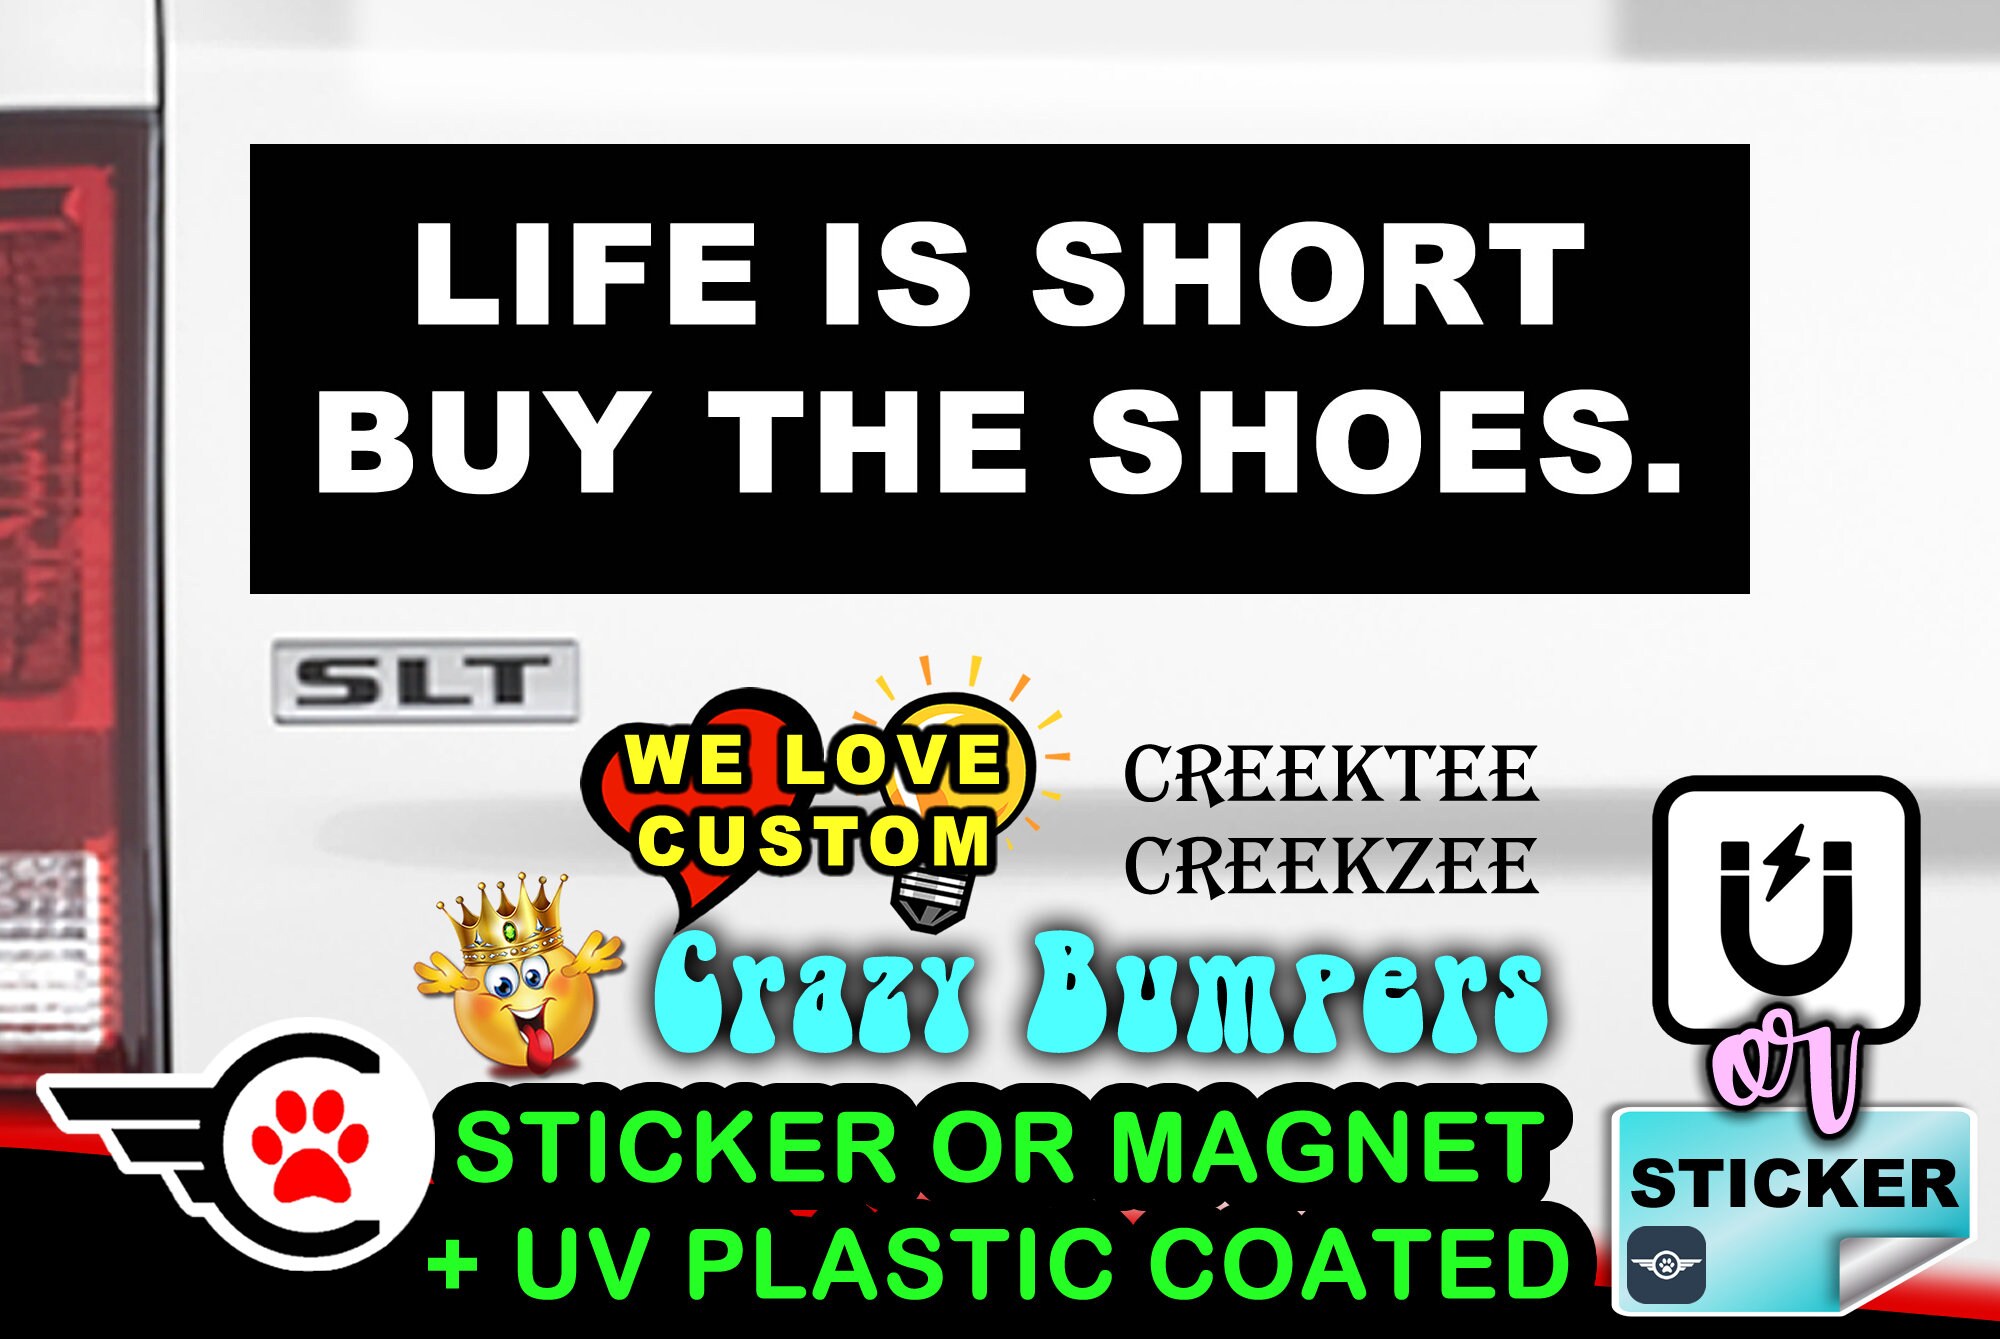 Life is short buy the shoes - Bumper Sticker or Magnet sizes 4